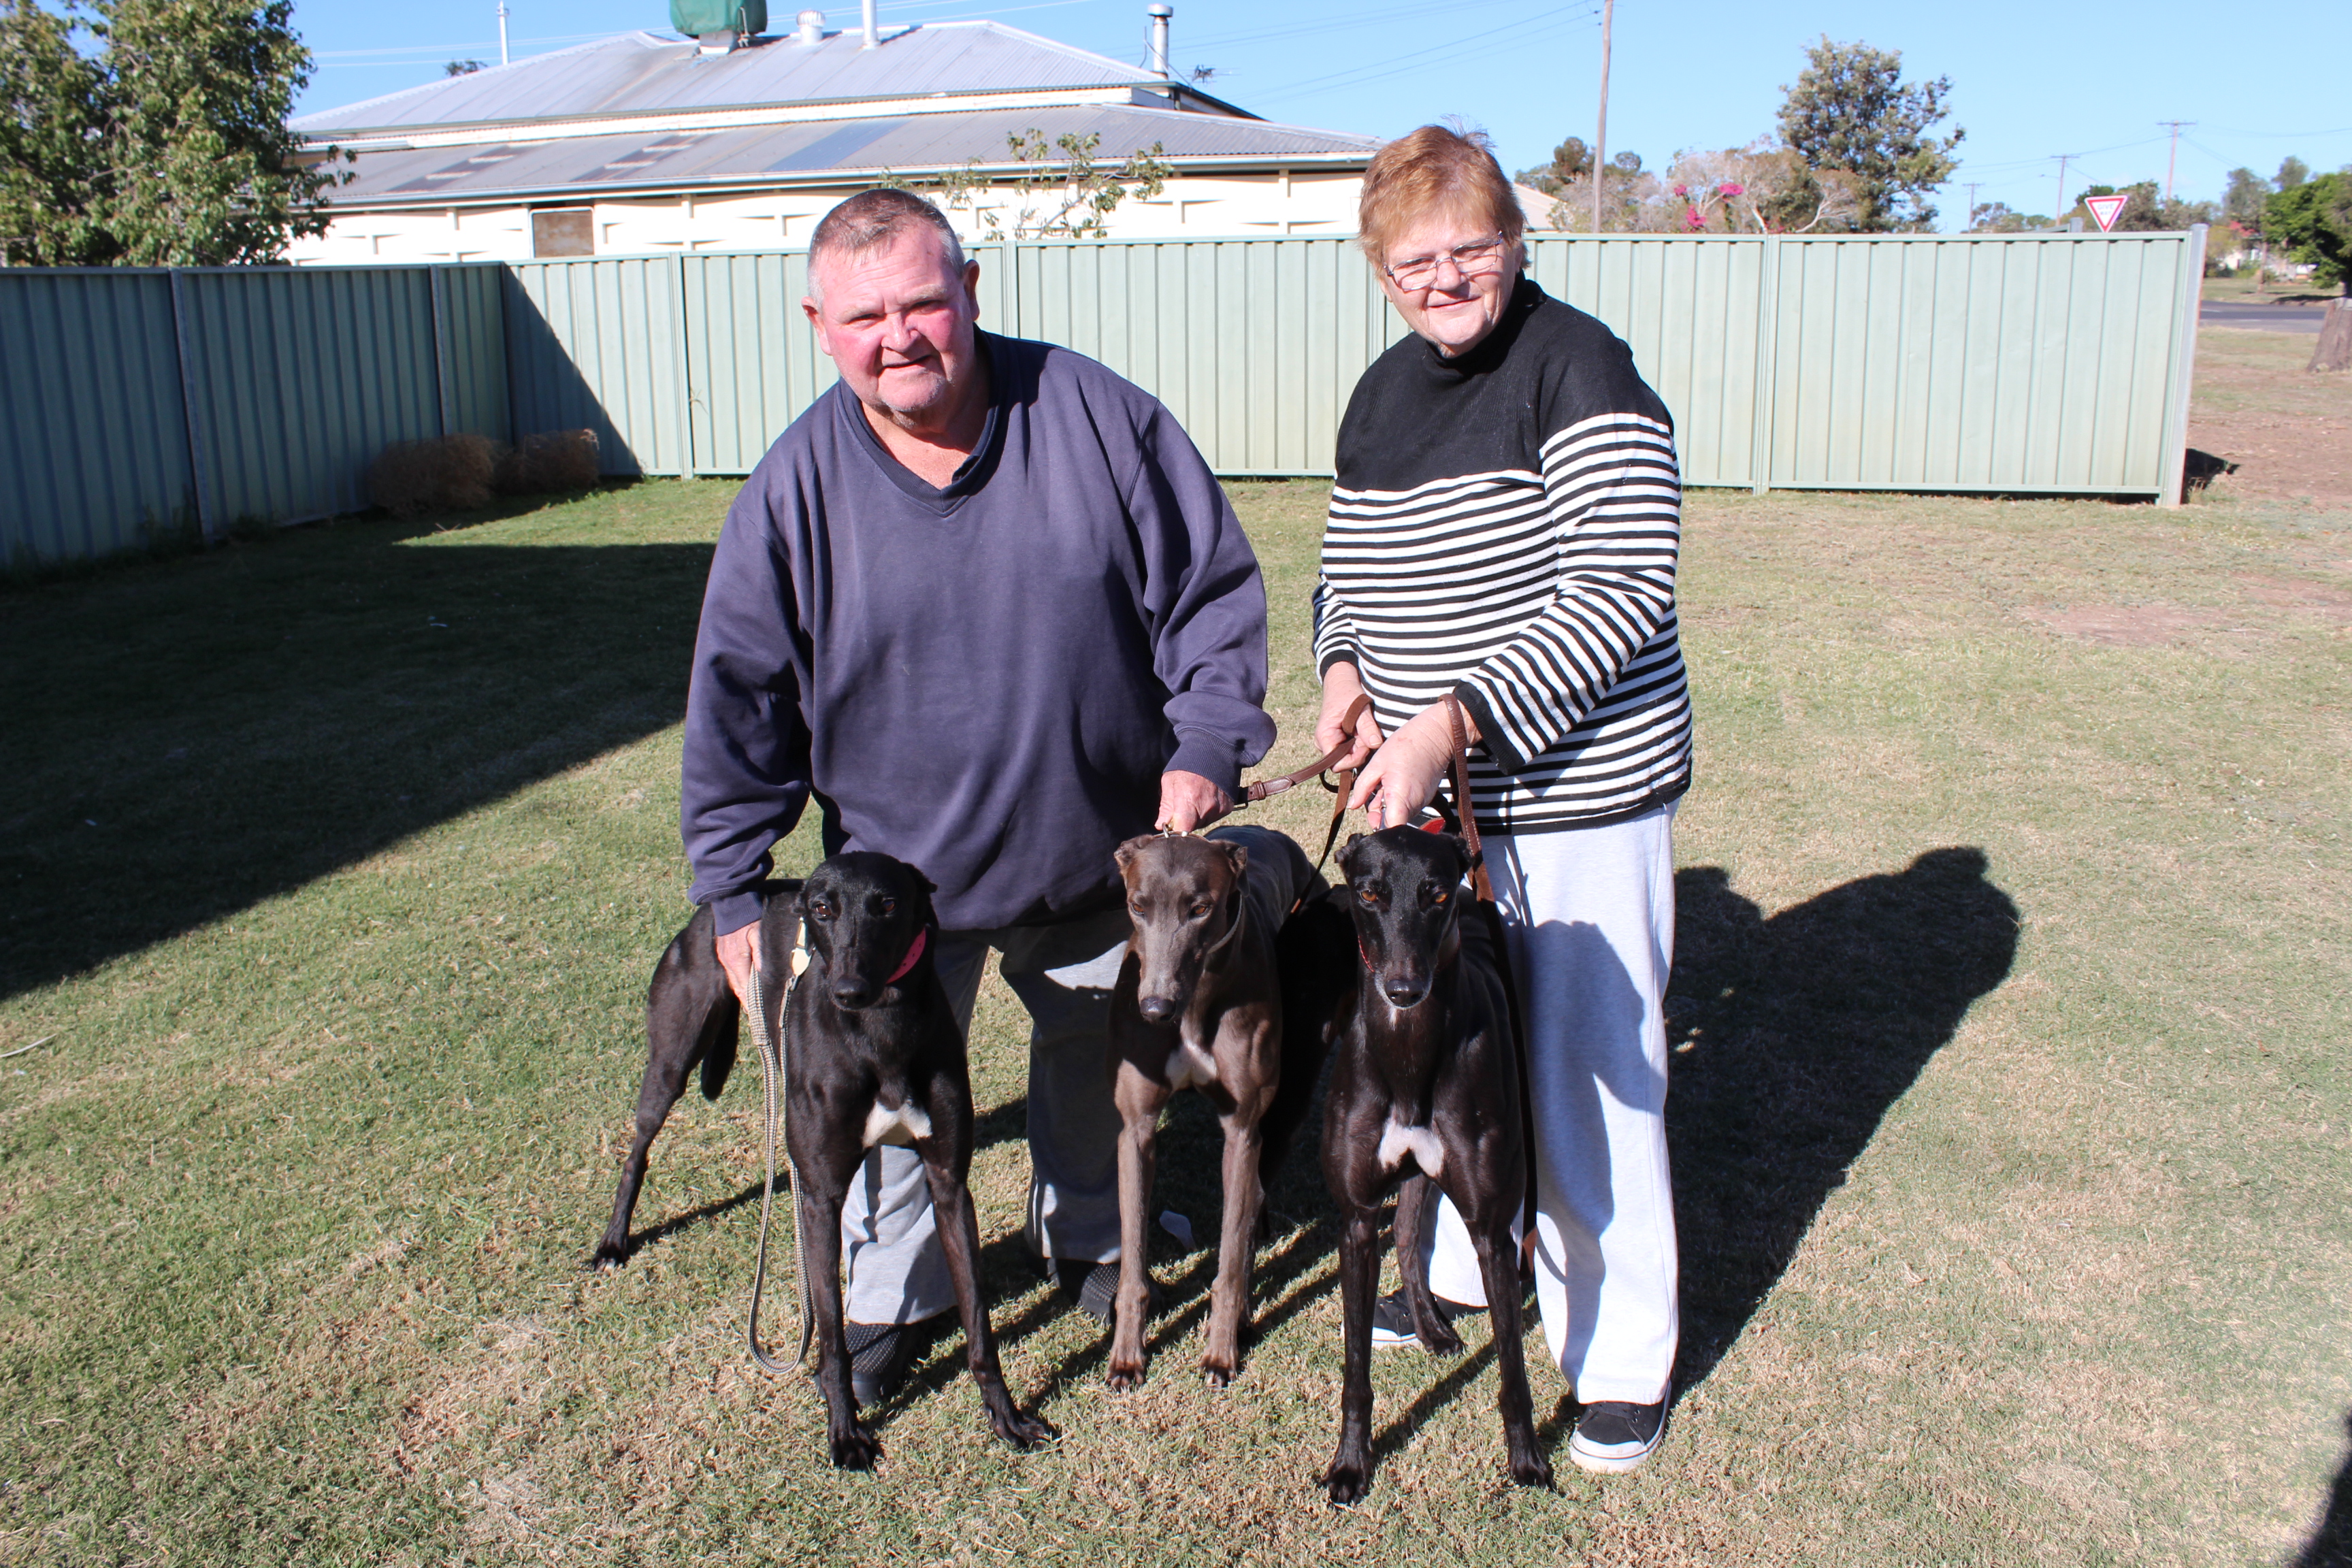 Locally-trained greyhounds excelling